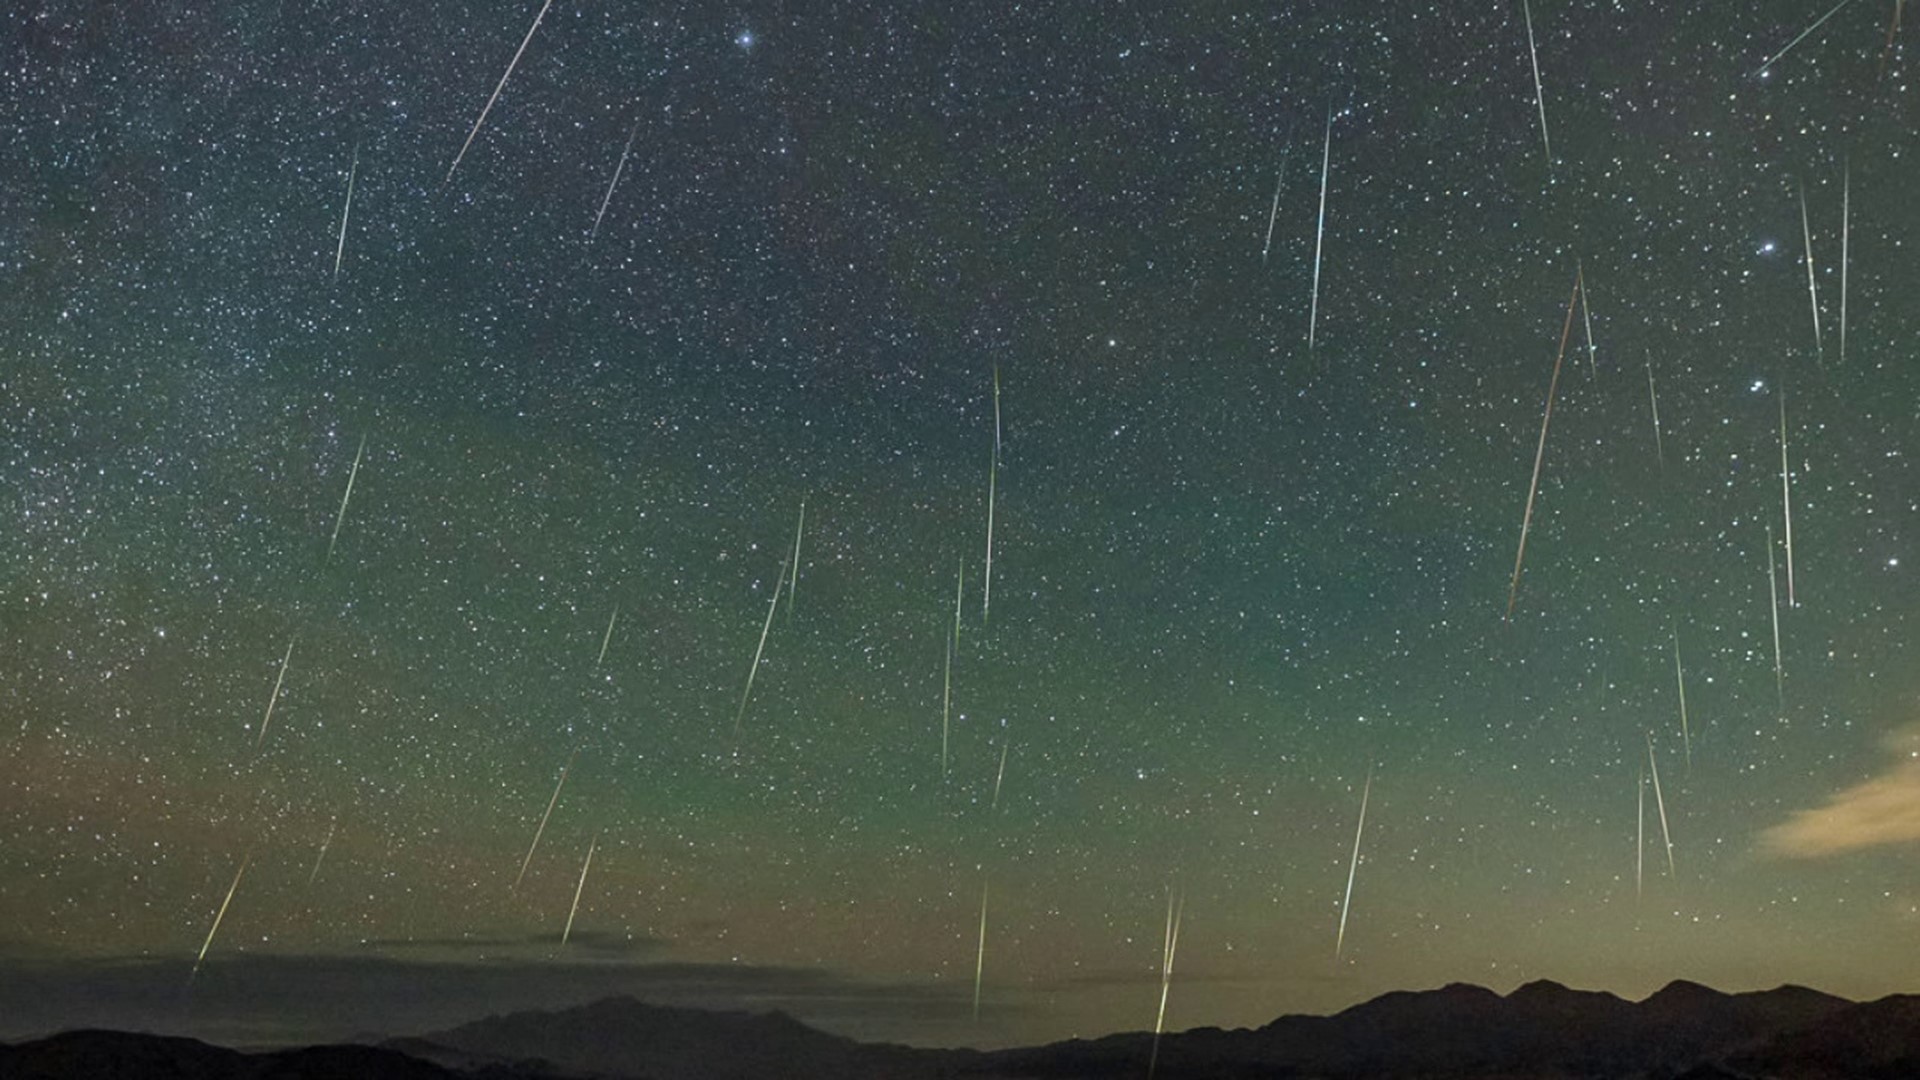 Newswatch 16's John Hickey says the waning days of May also come with a waning moon. This will potentially help set the stage for an impressive meteor shower.